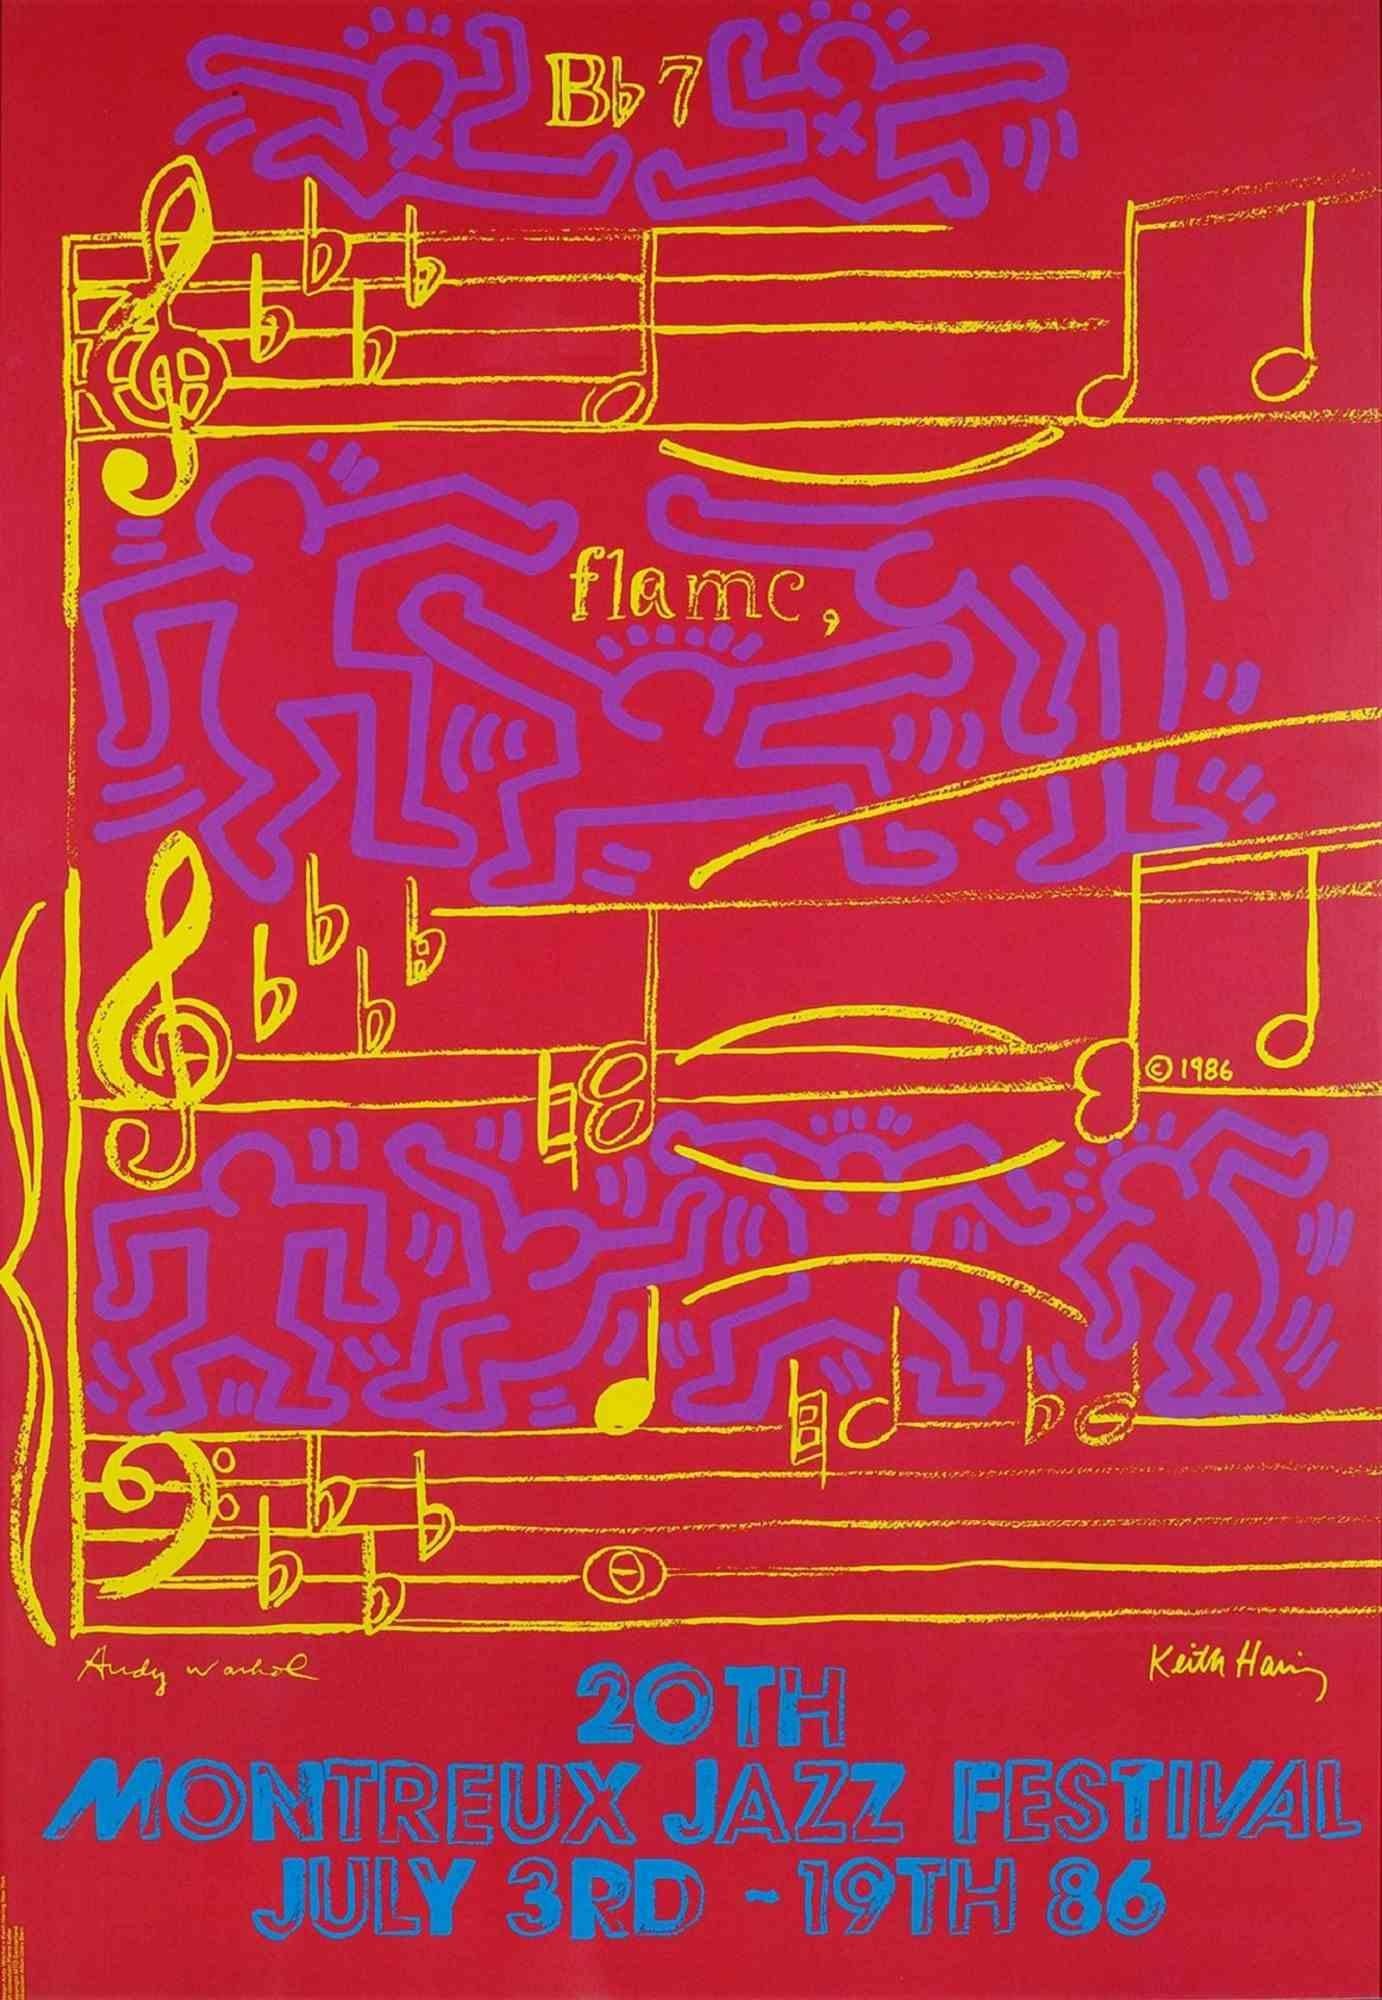 Keith Haring Abstract Print - Untitled IV - Screen Print on Cardboard - 1986